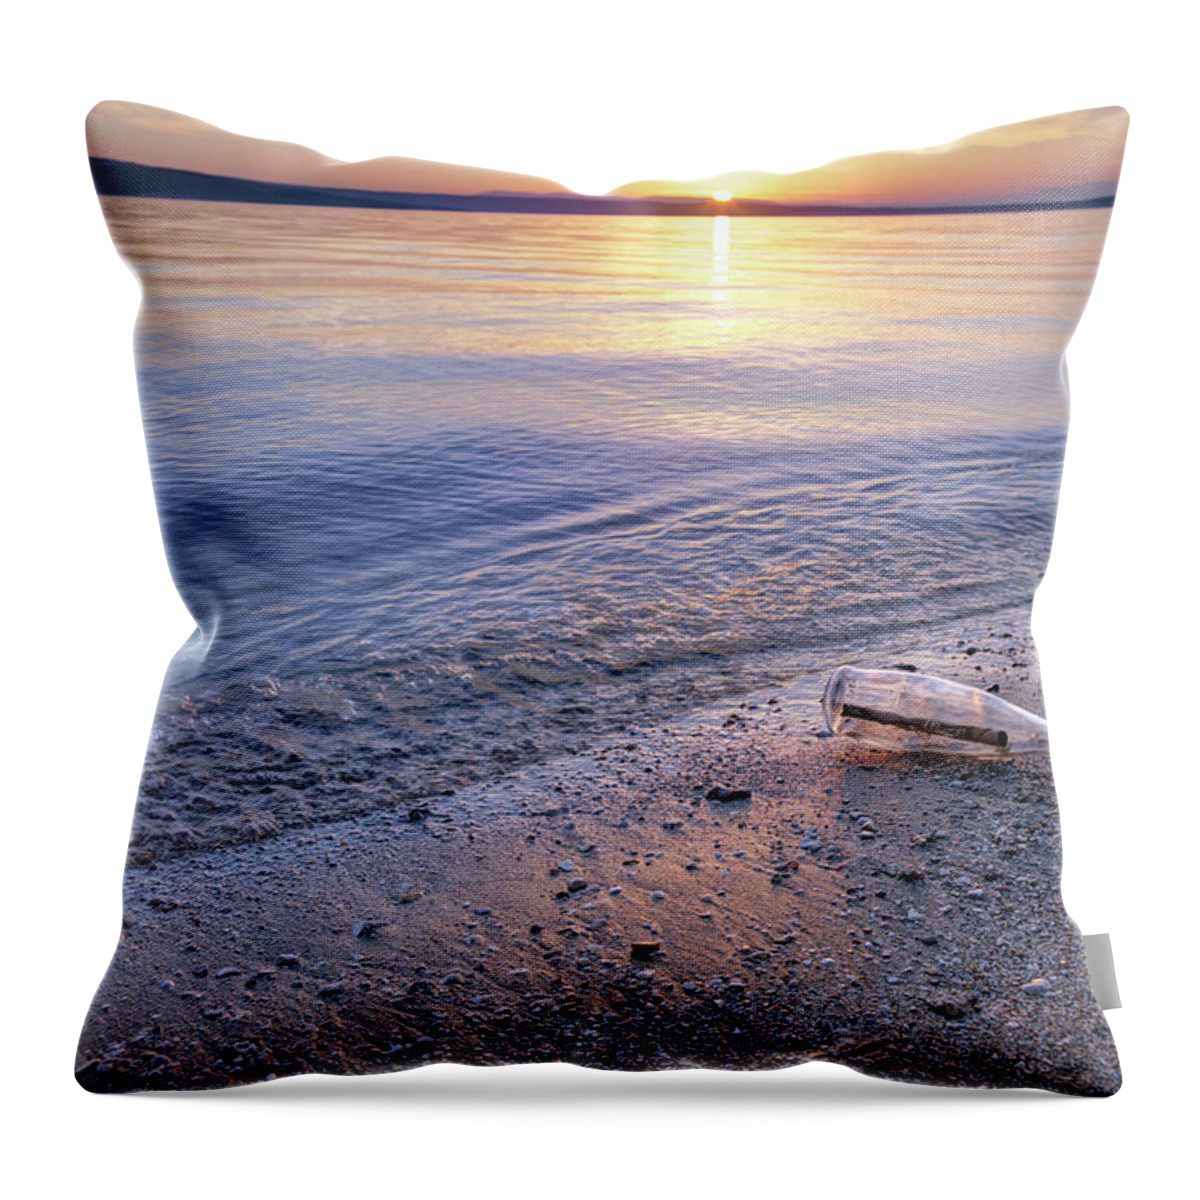 Confusion Throw Pillow featuring the photograph Sos by Vuk8691